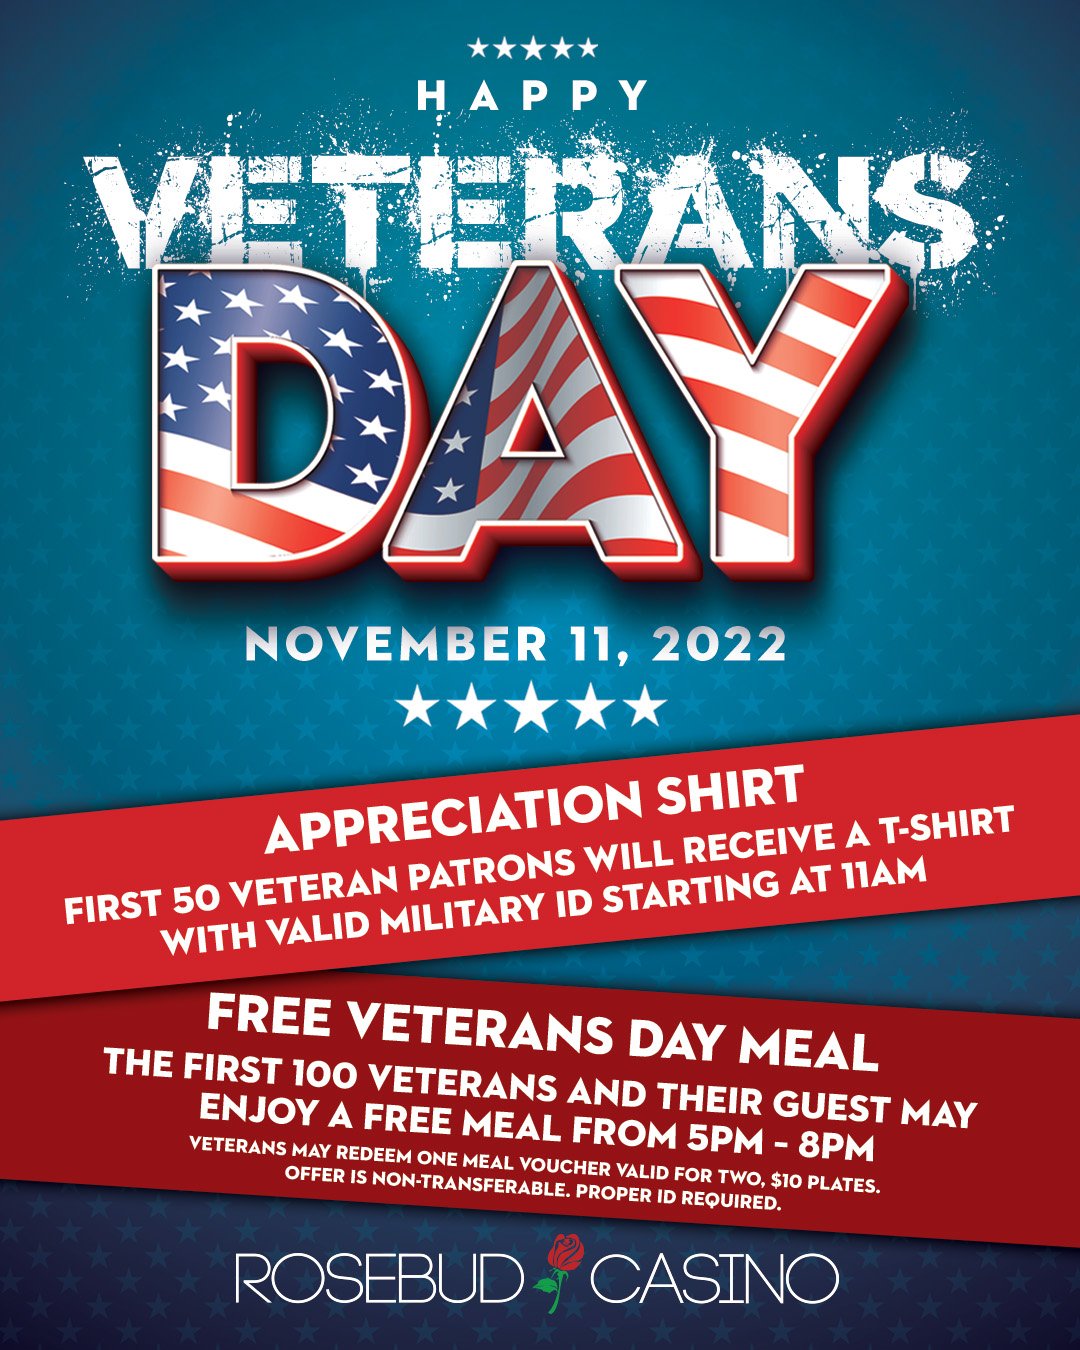 Veterans Day: Free meals or discounts for military veterans